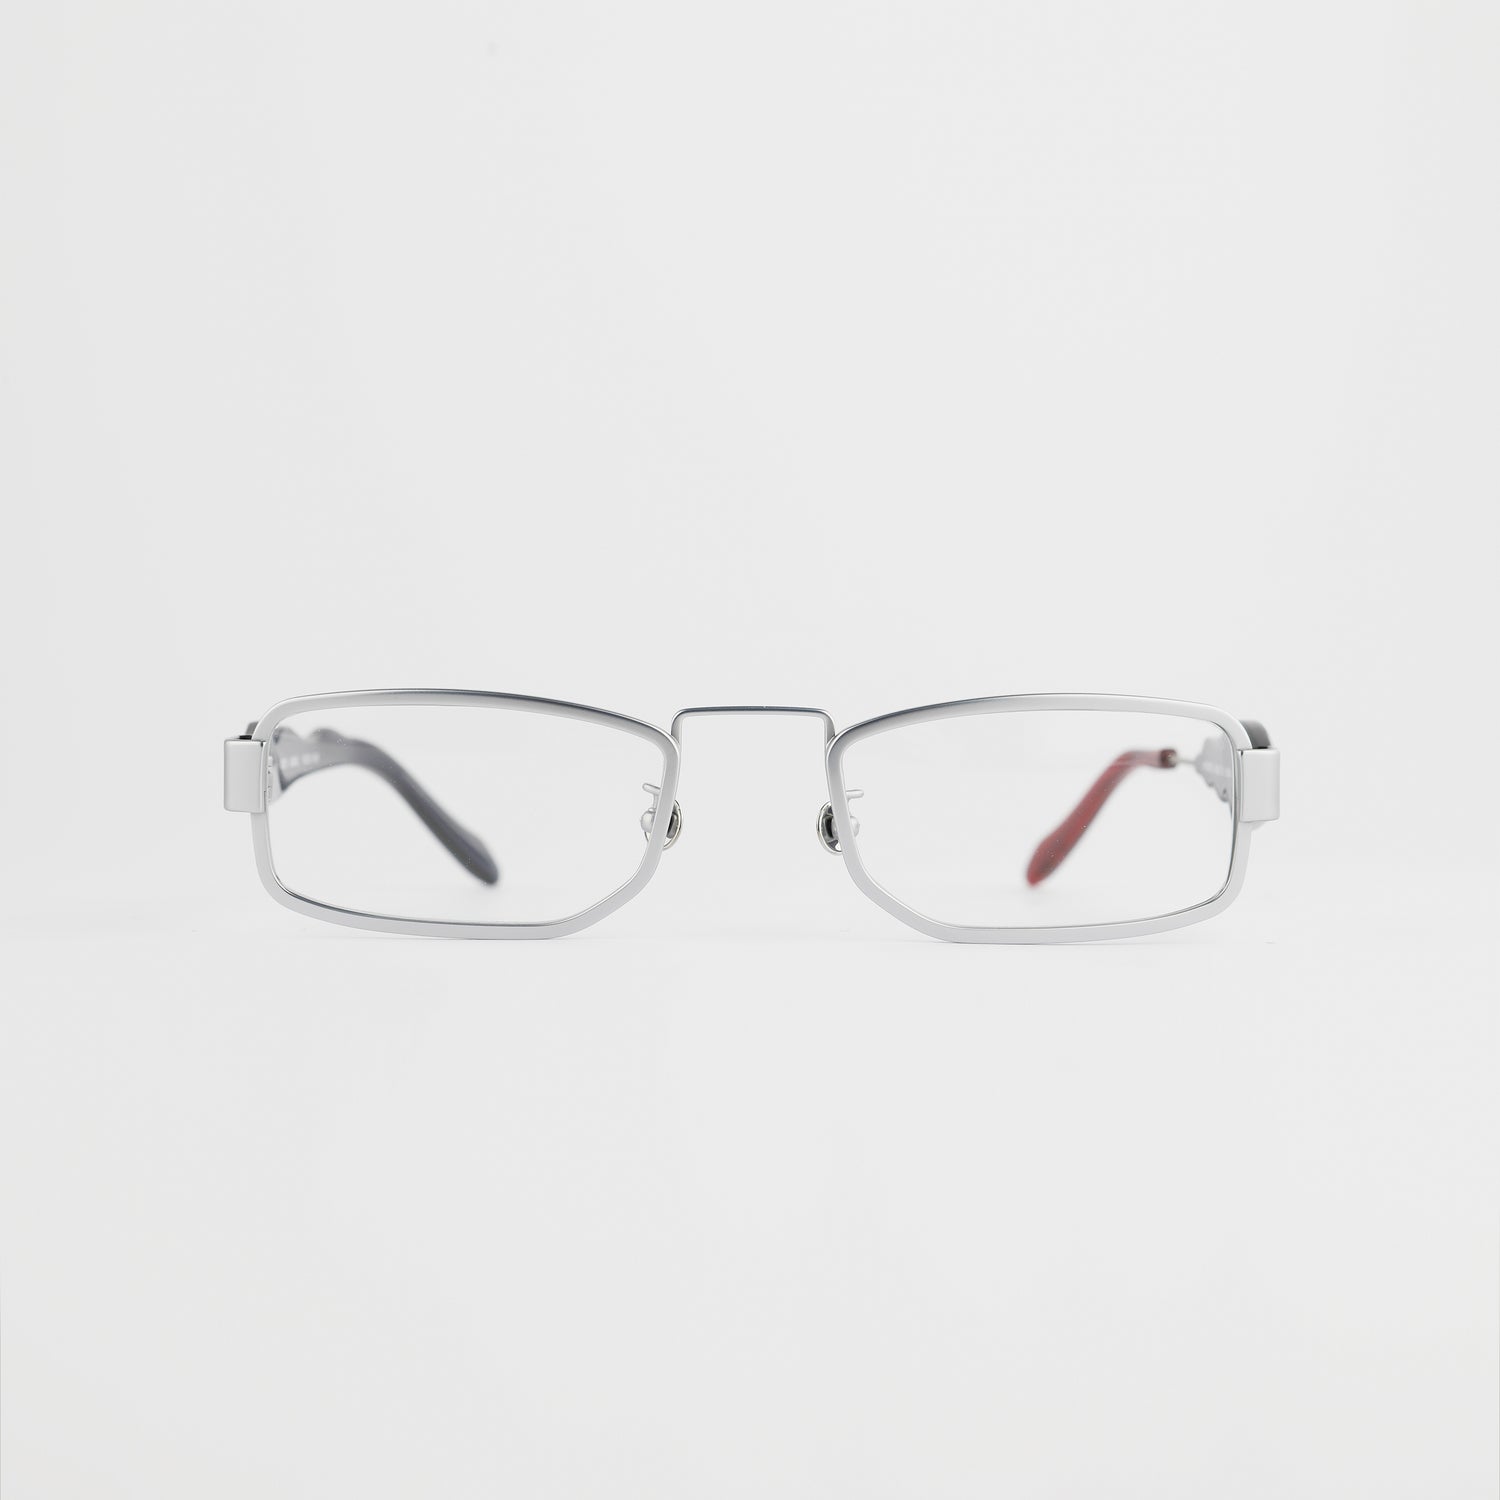 silver colour titanium rectangle optical frame with black acetate temples and a red tip front